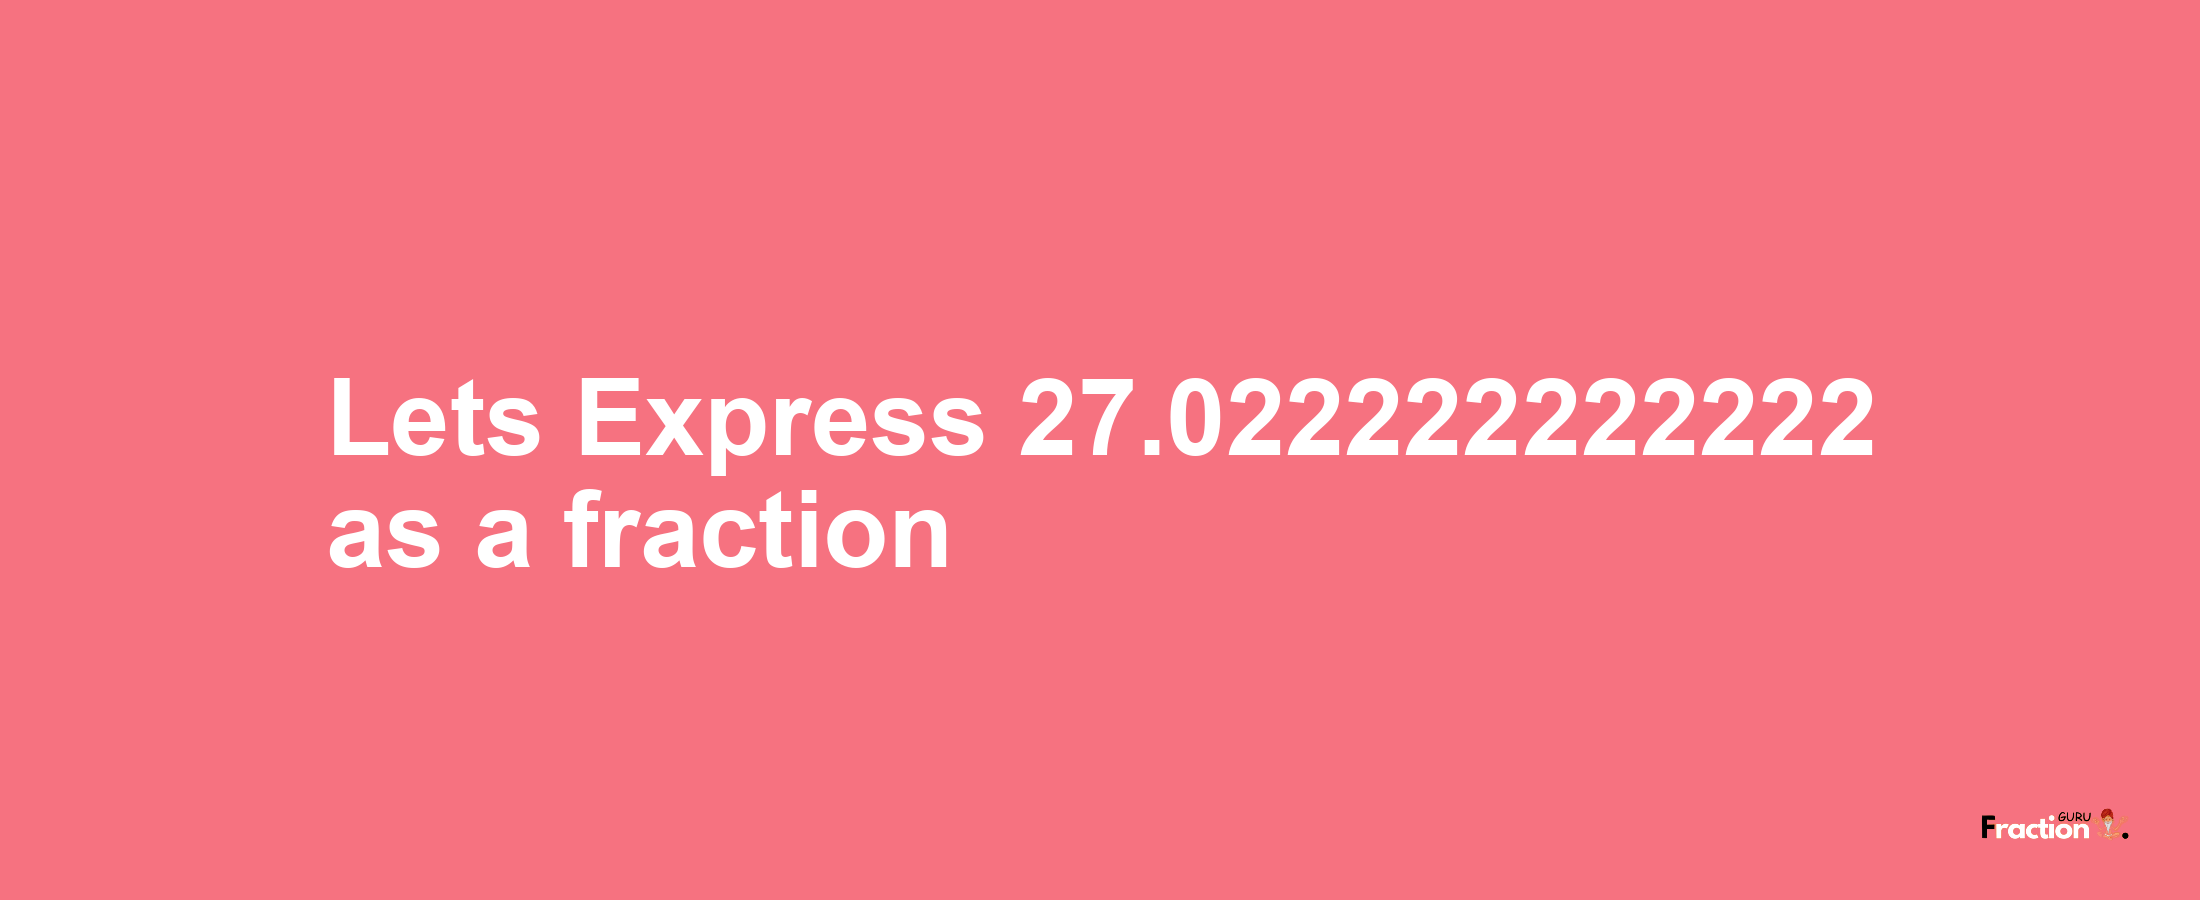 Lets Express 27.022222222222 as afraction